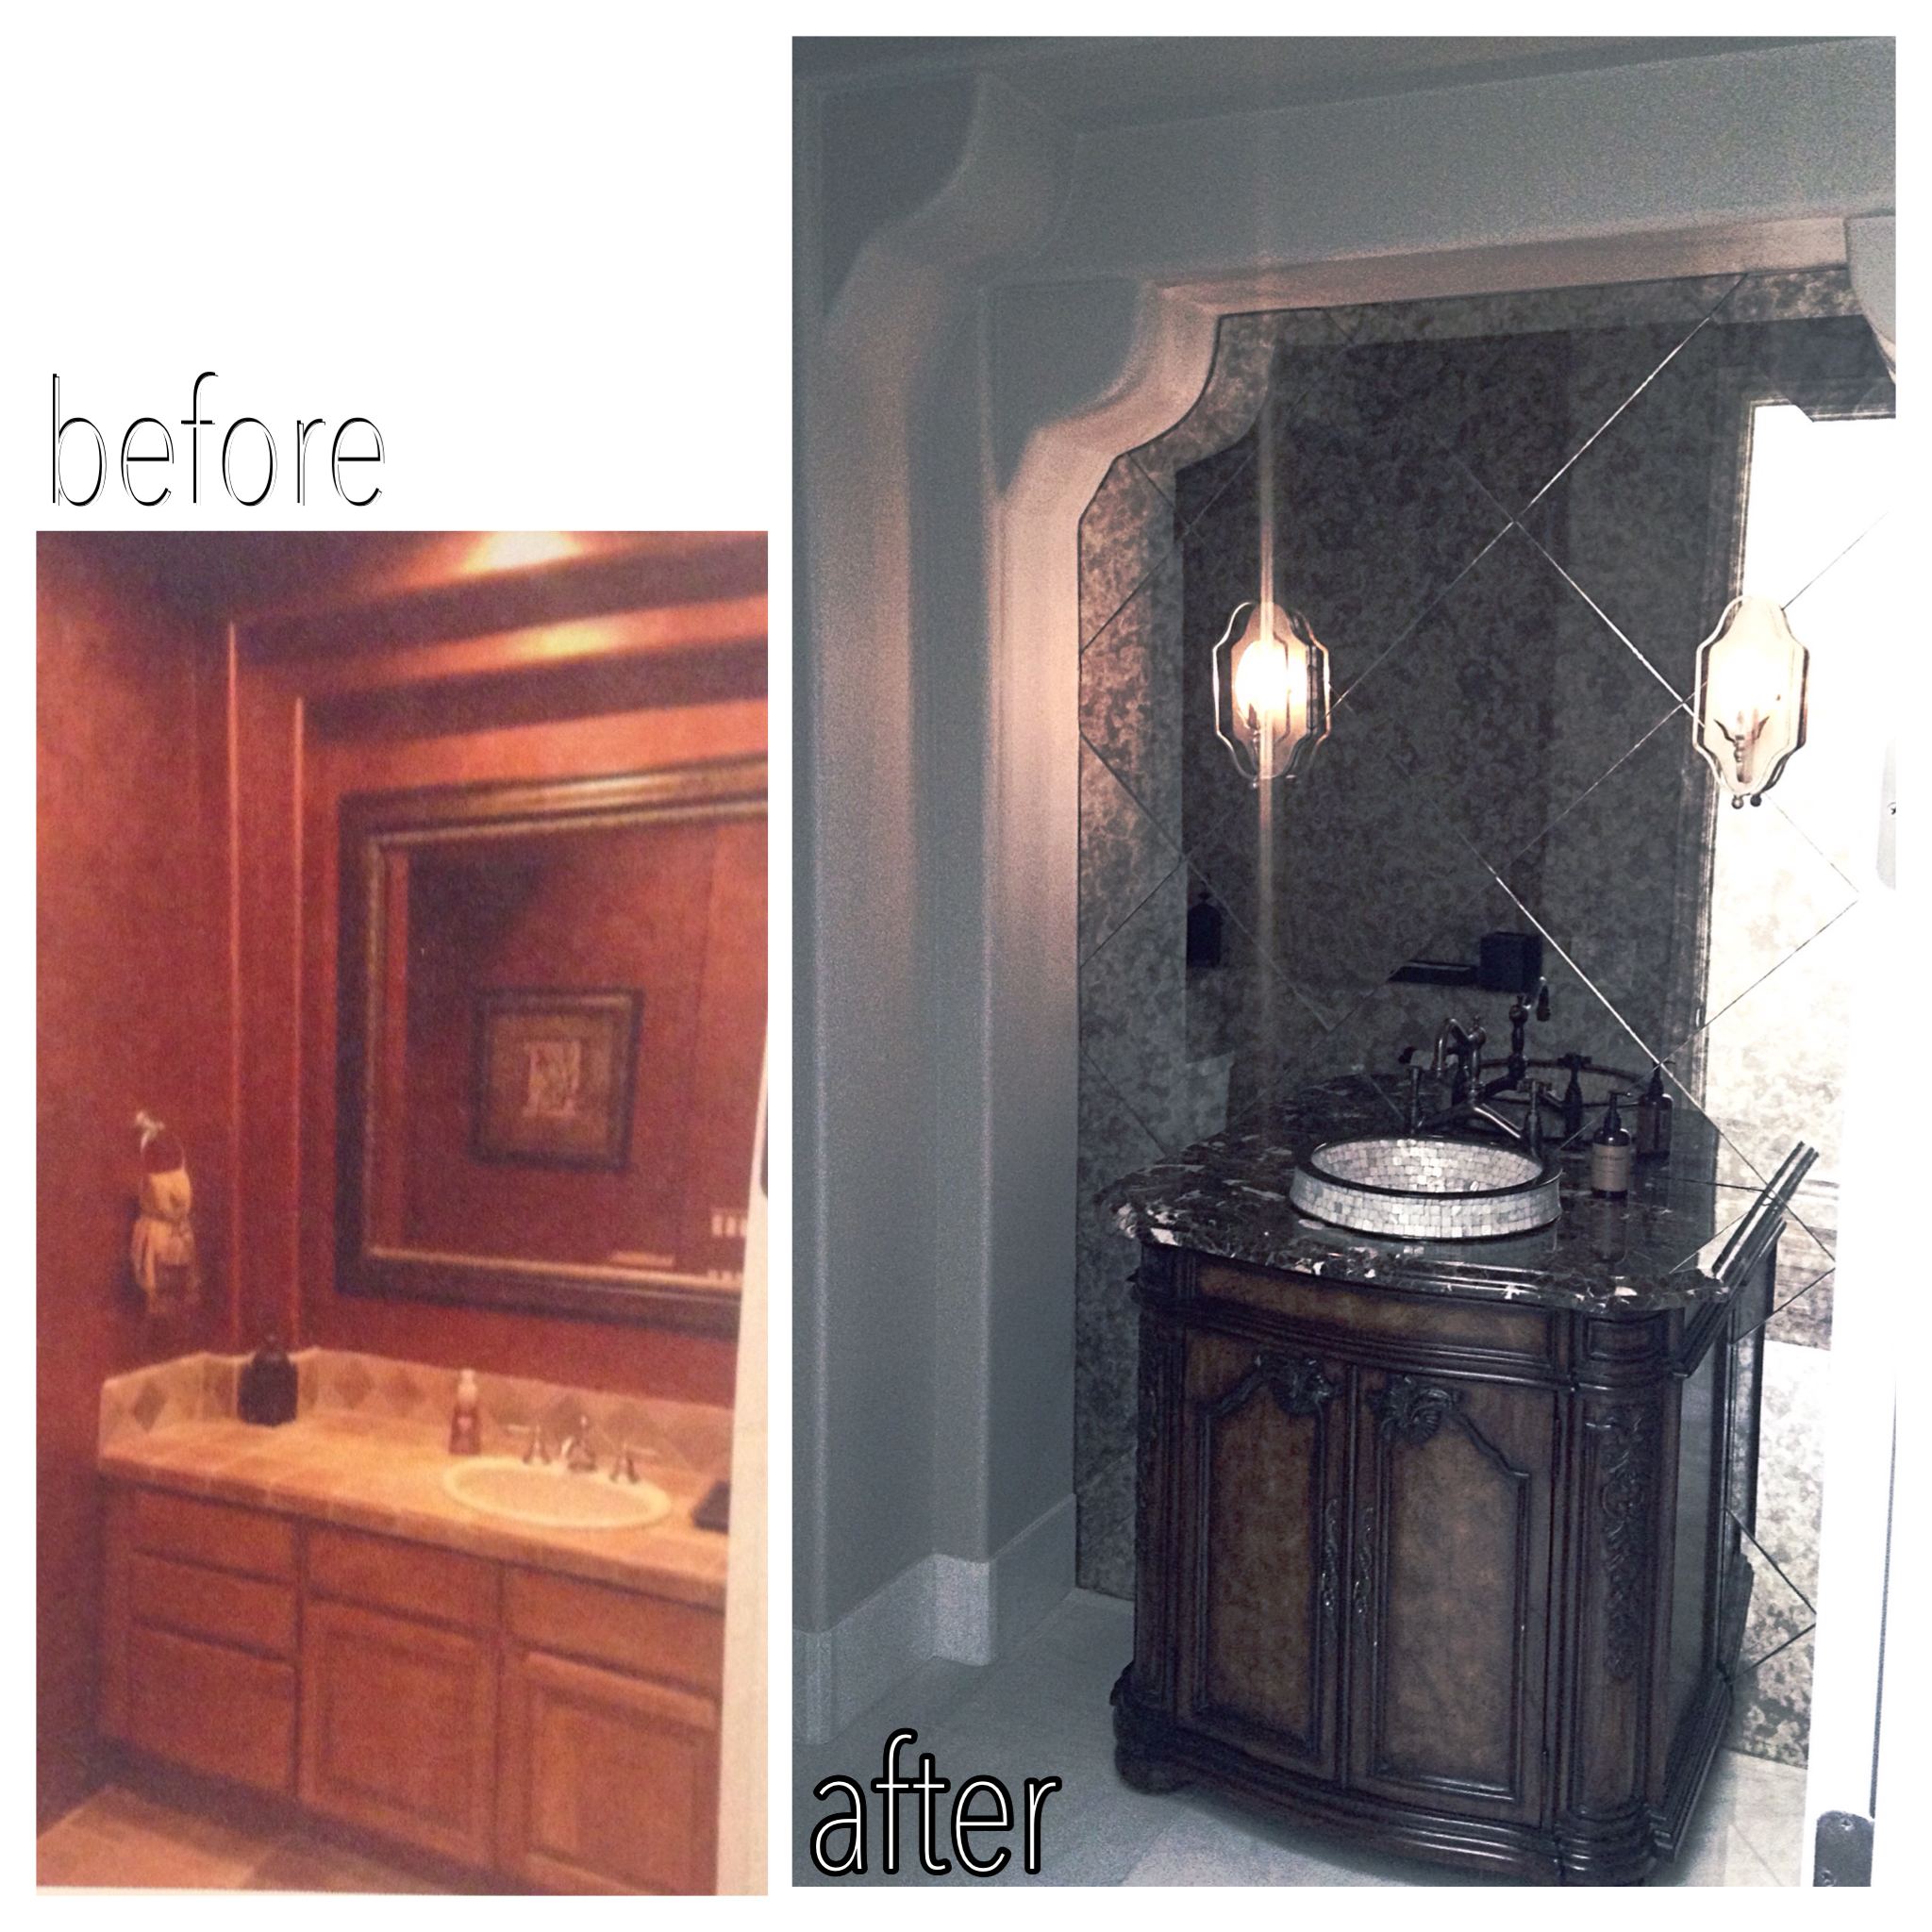  : Before & After's : CASA DEL REY HOMES